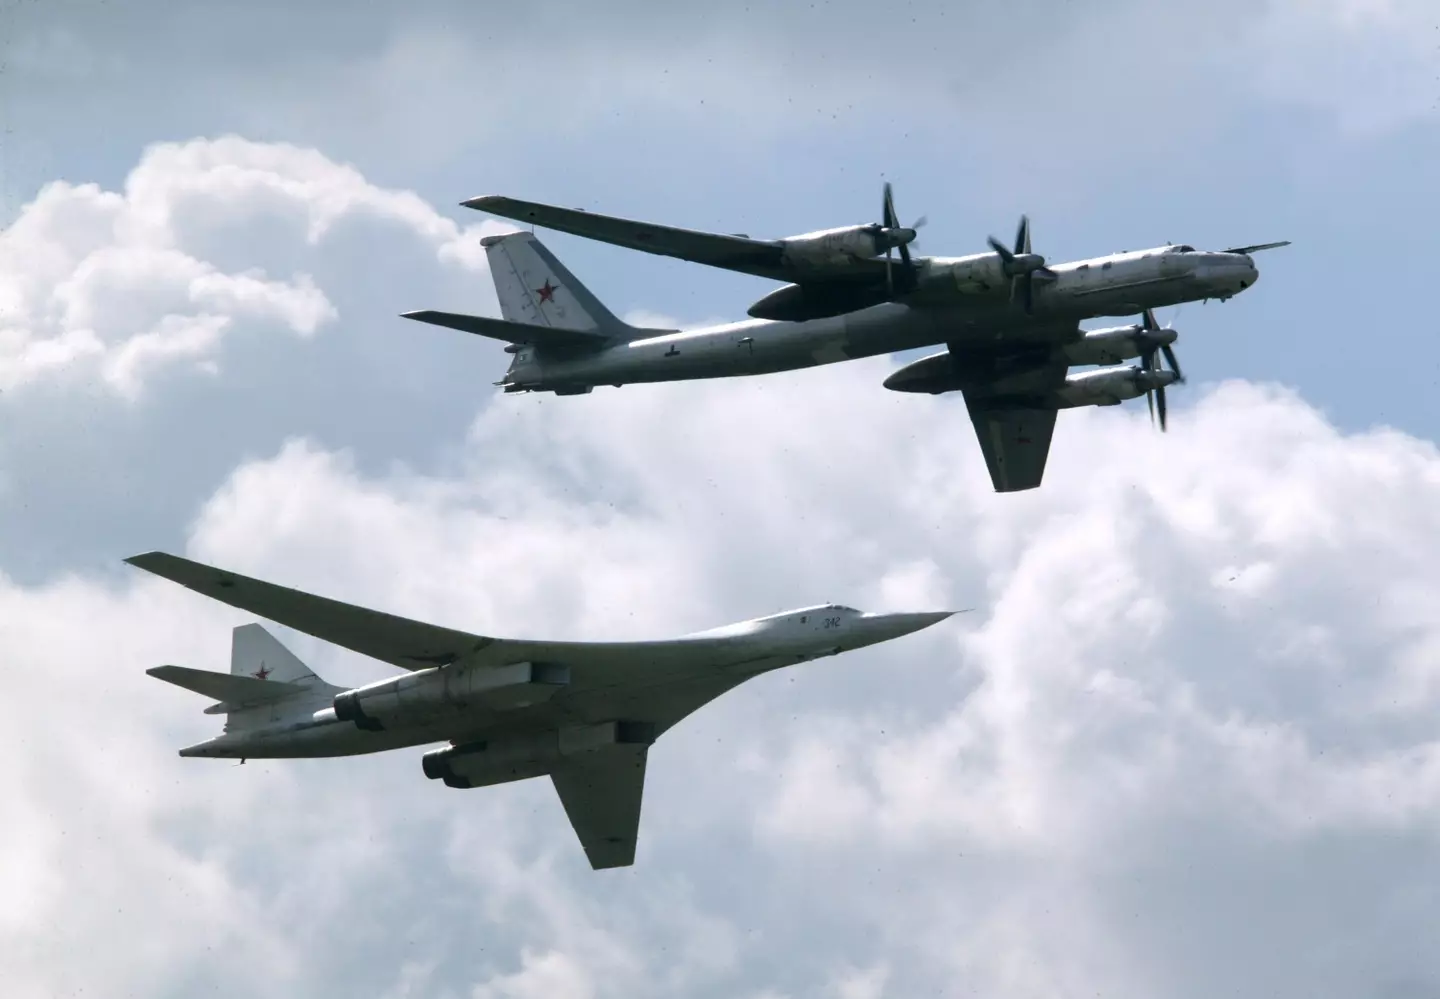 The Tu-160 and Tu-95 strategic bombers are both weapons from the Cold War era capable of dropping nuclear weapons.